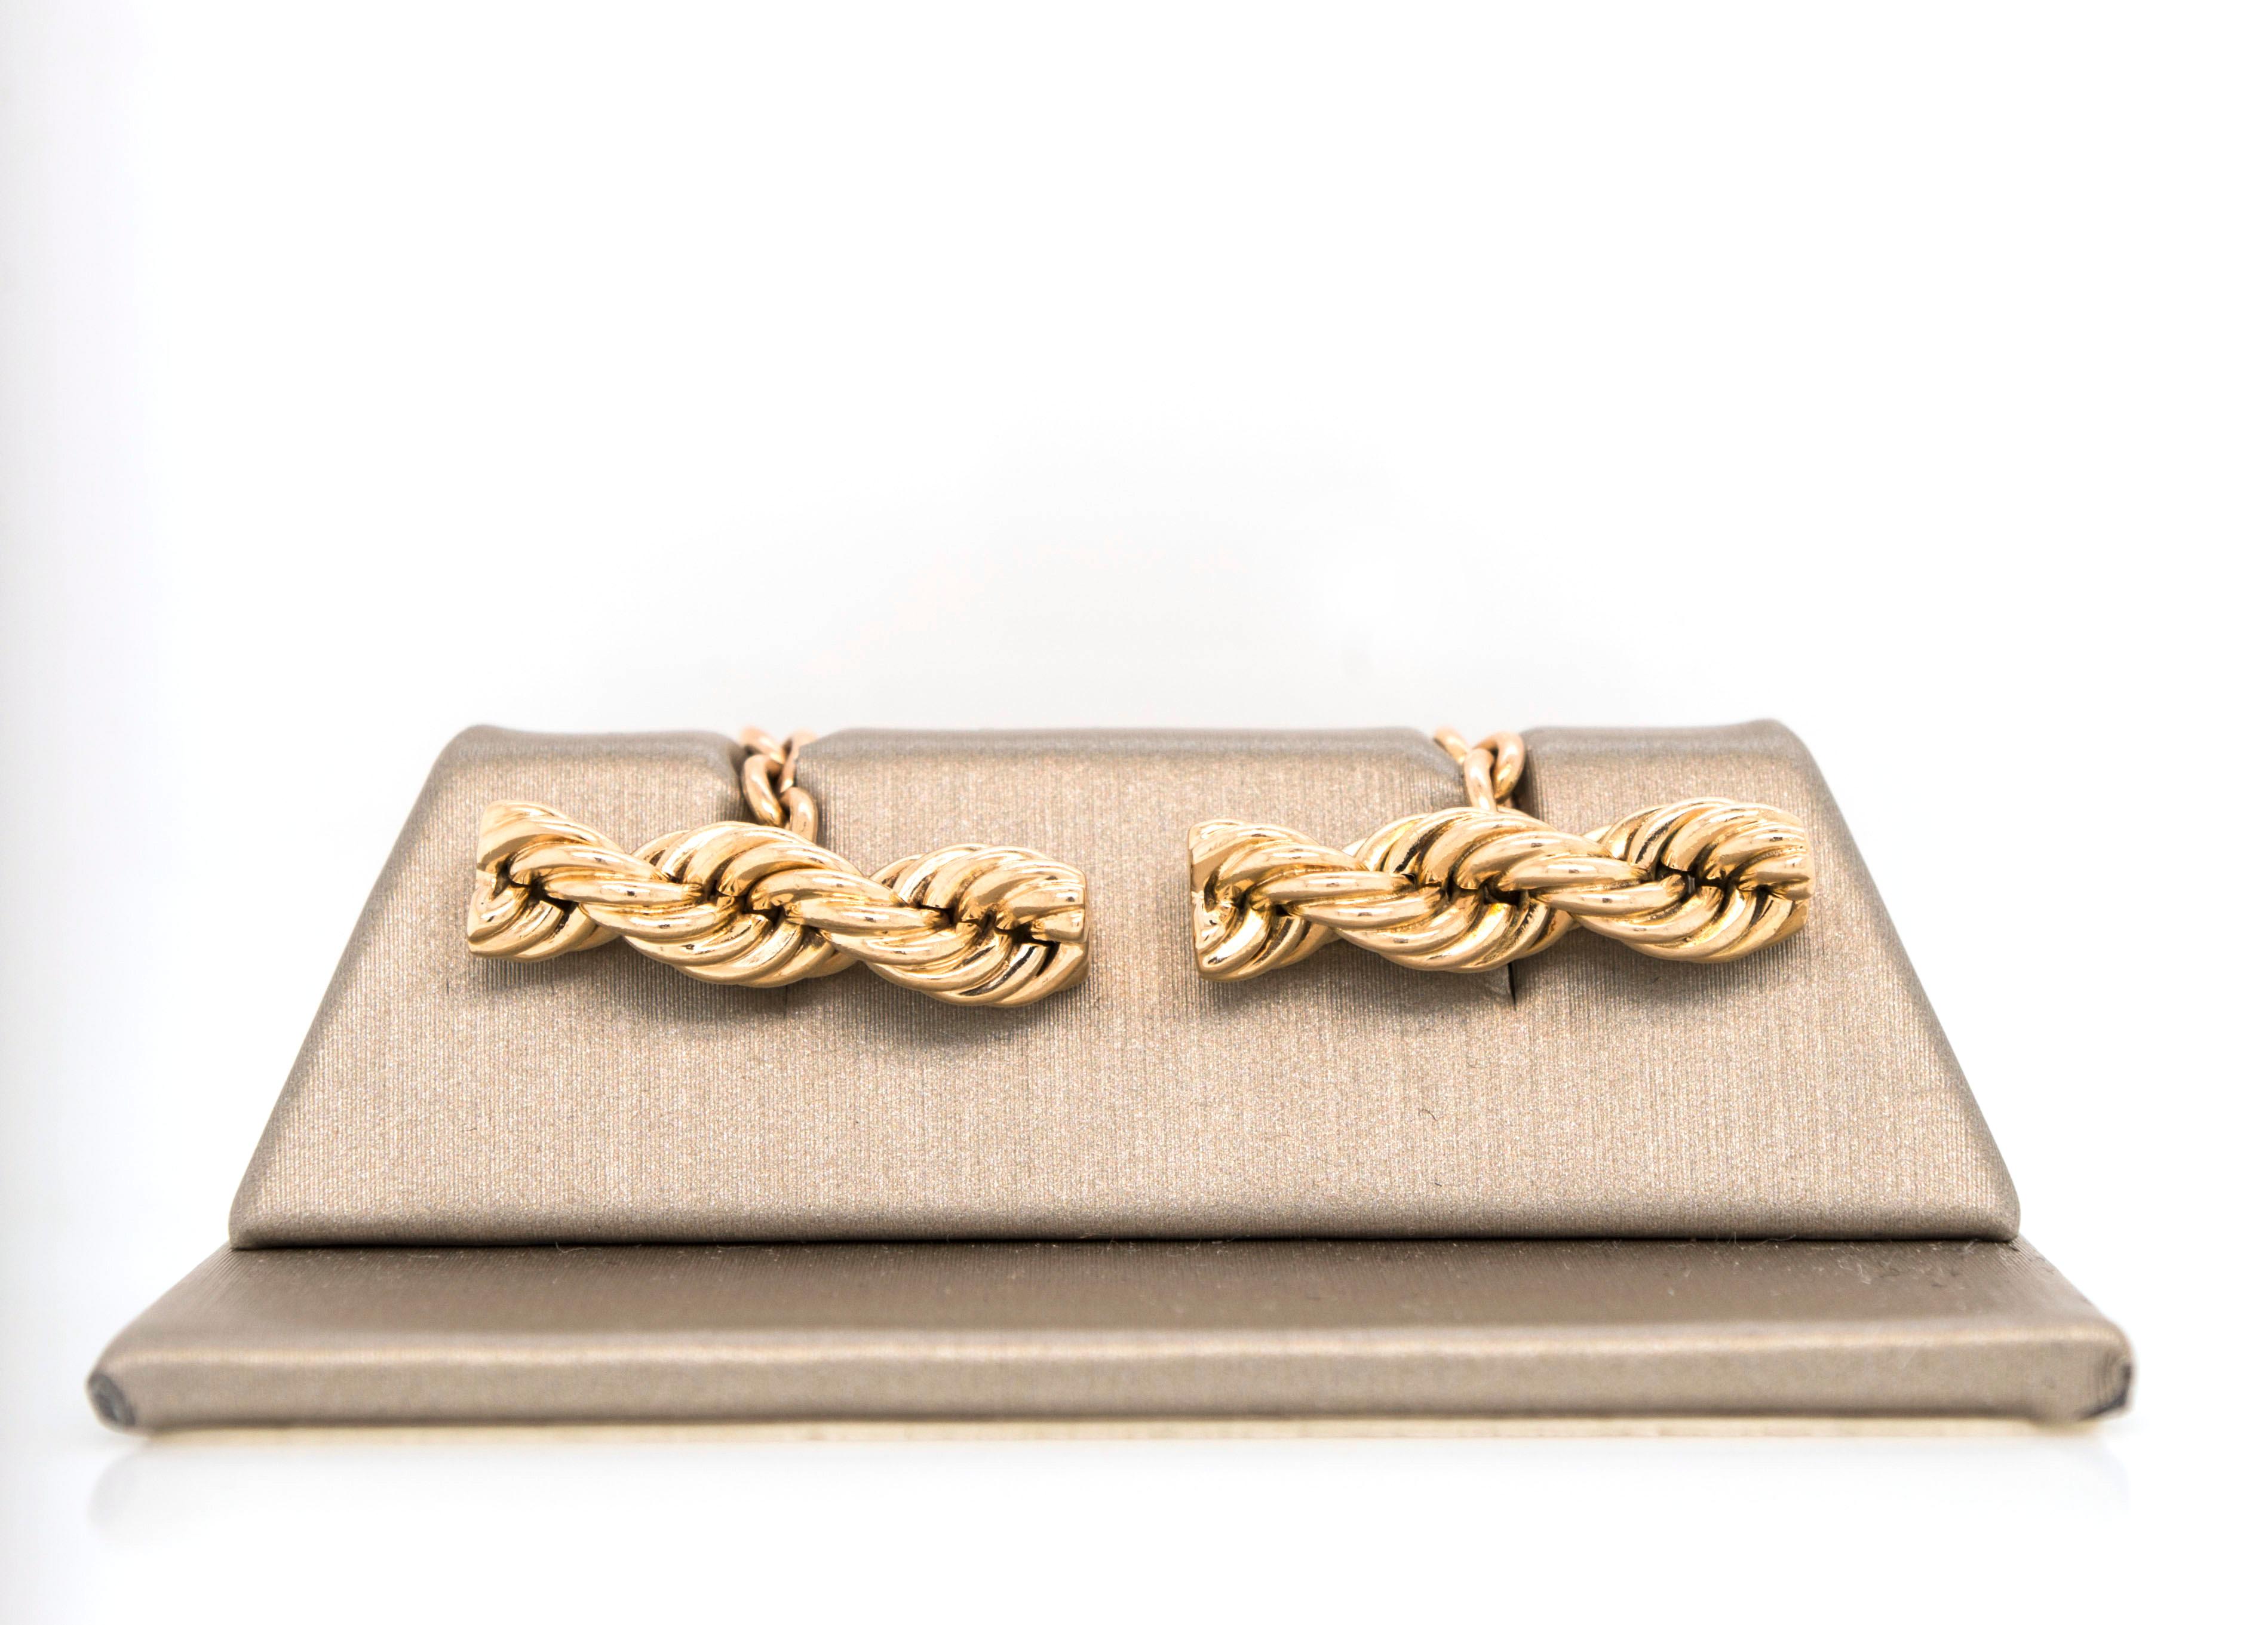 Iconic Twisted Rope Chain by Cartier.  Simple and elegant, these twisted rope cufflinks in 14k yellow gold
will elevate your style any day of the week. Chain link closure.
Very good condition.
Signed 